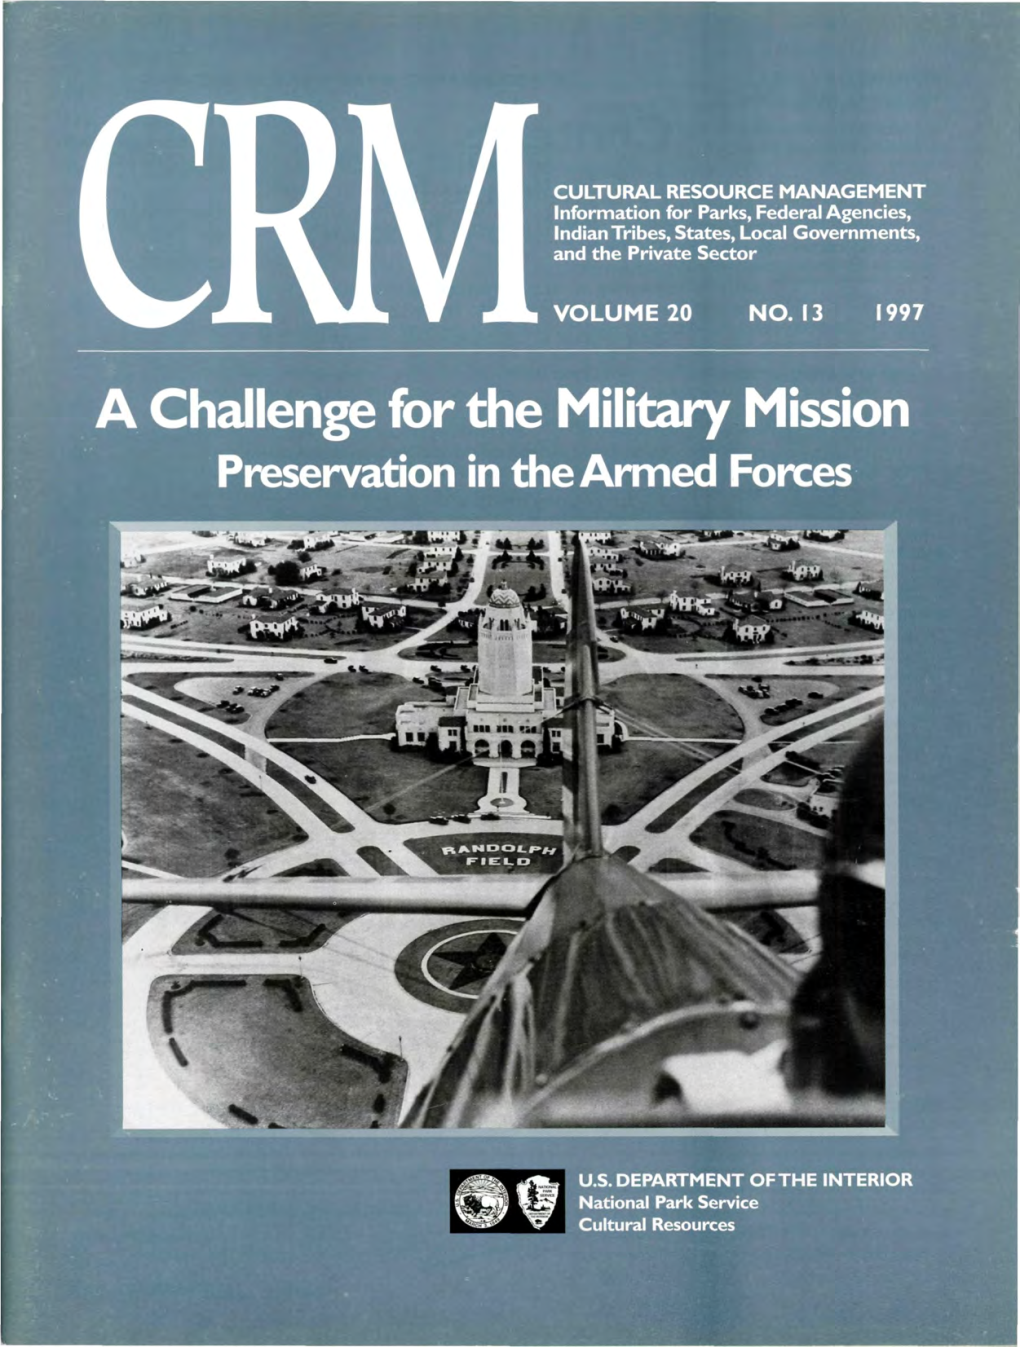 A Challenge for the Military Mission Preservation in the Armed Forces